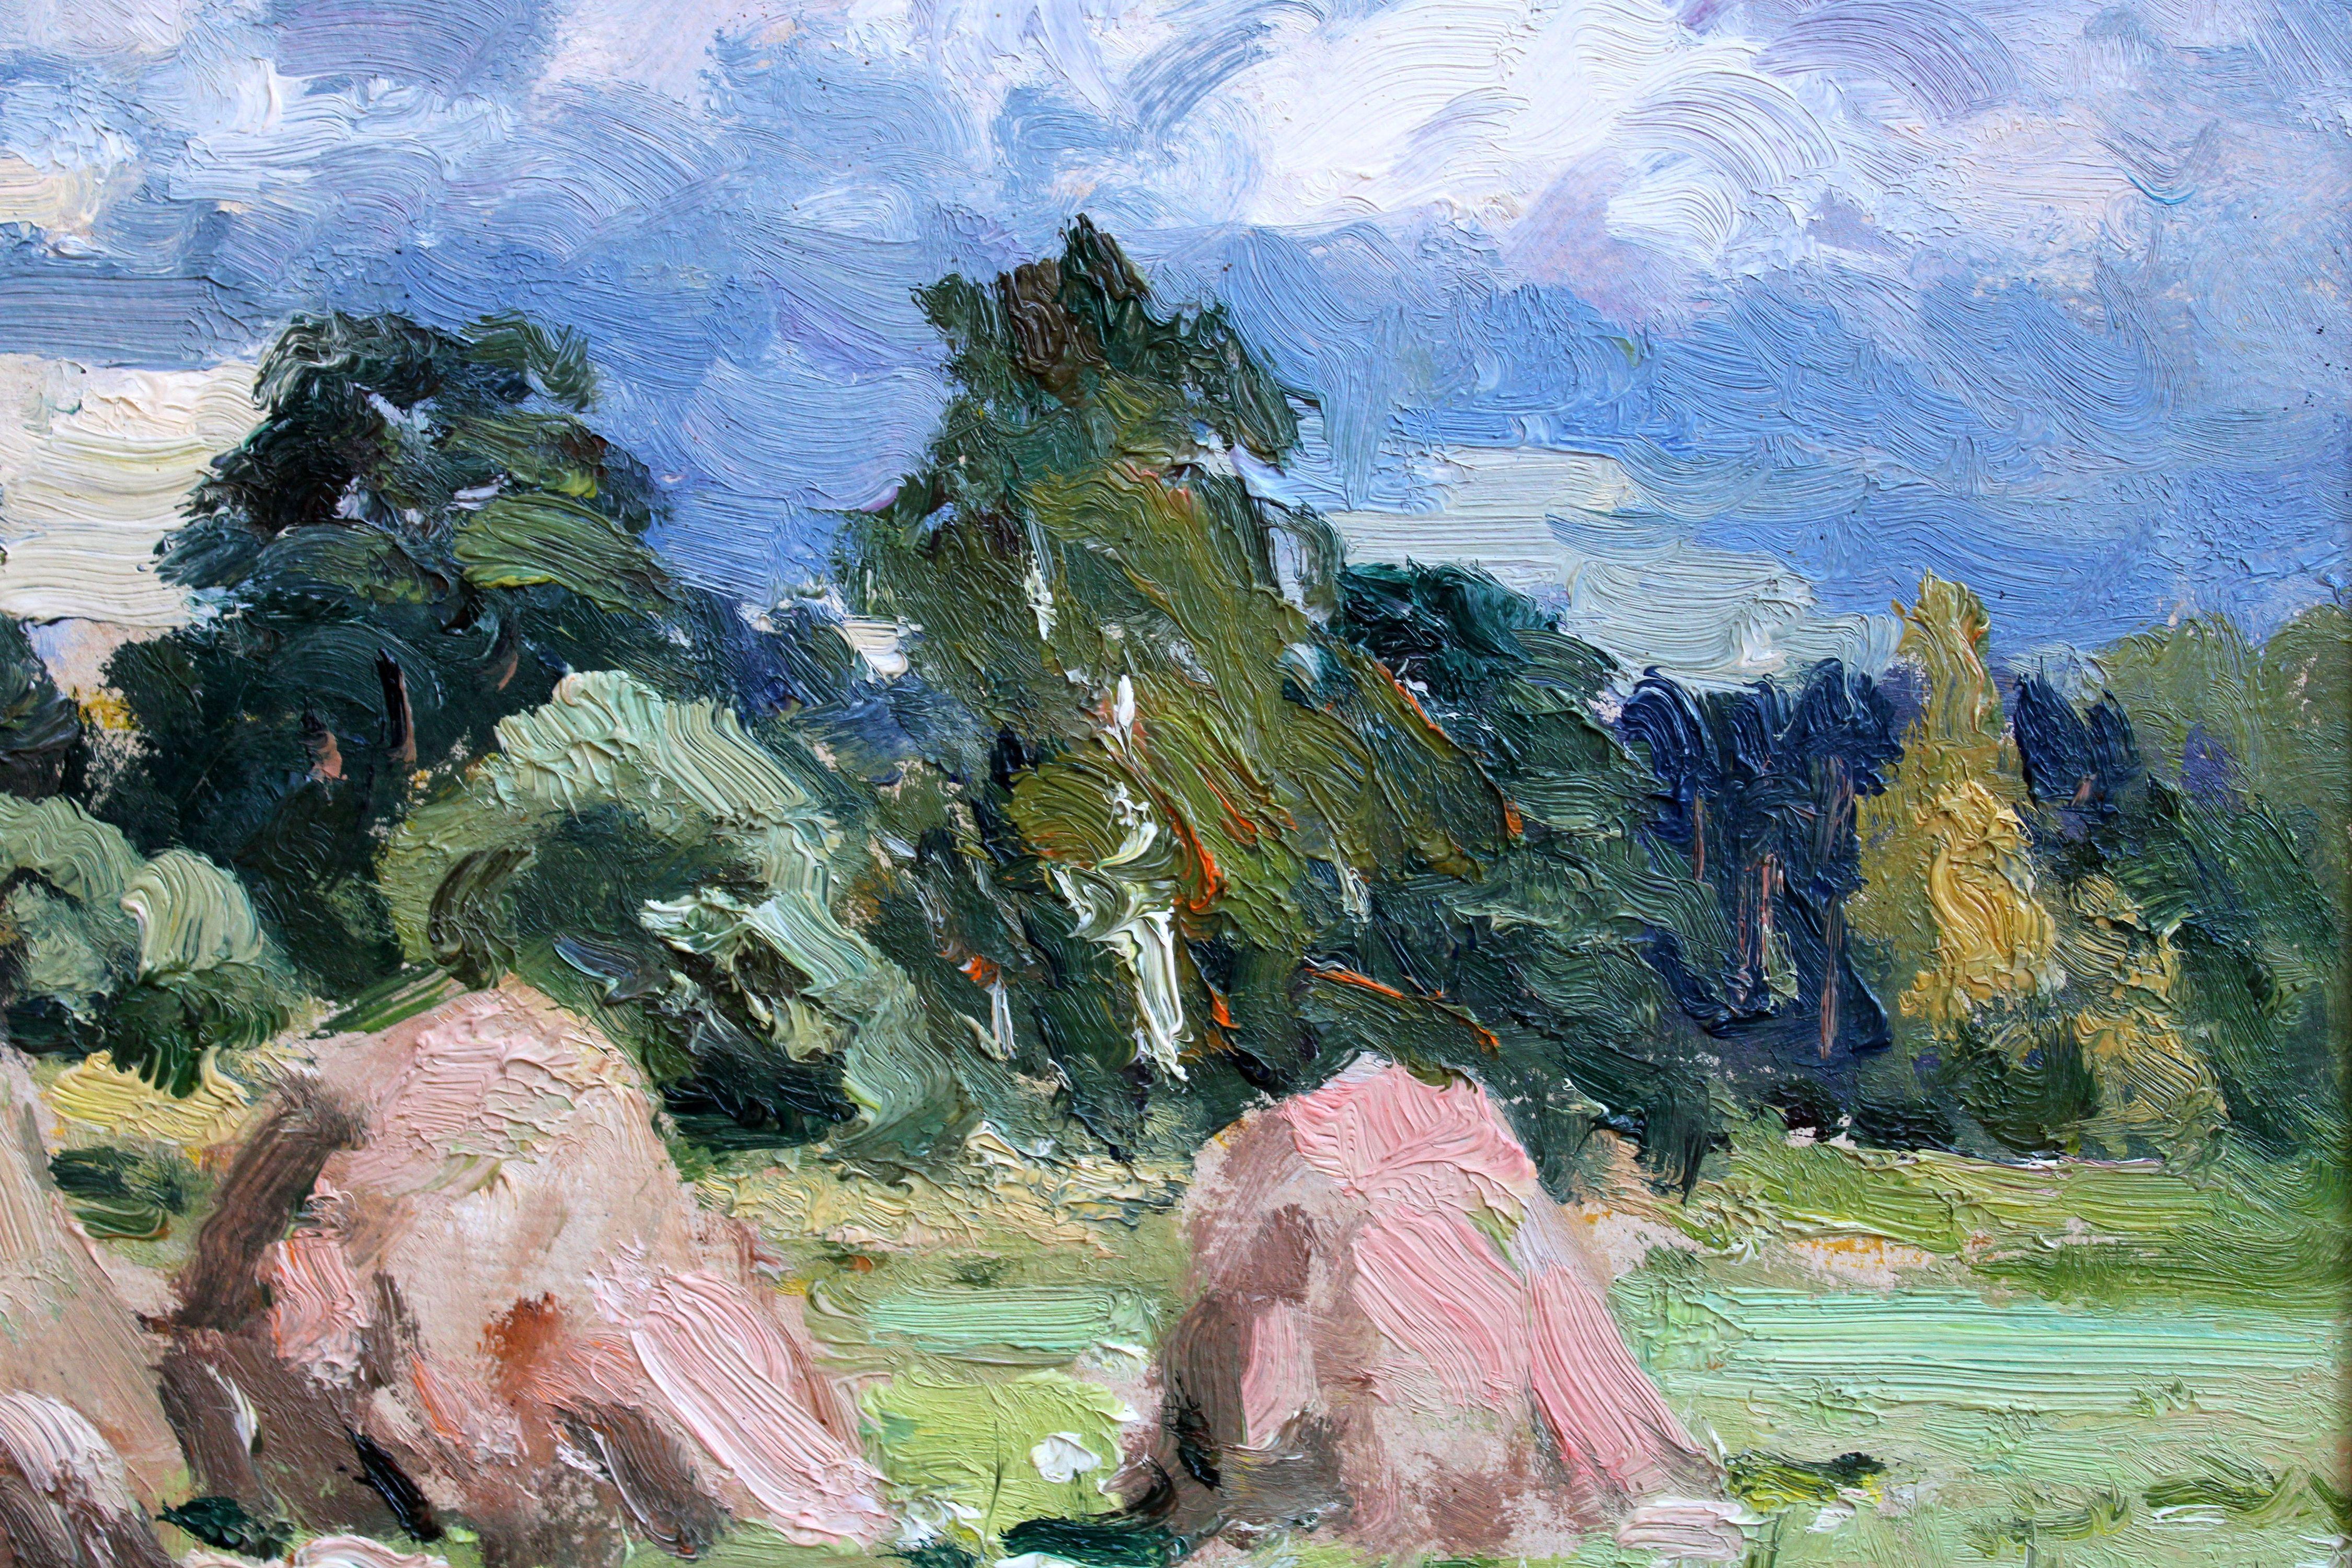 Haystacks. 1984, cardboard, oil, 40x49.5 cm

Edgars Vinters (1919-2014)
Edgars Vinters is working in oil, watercolor and monotype techniques. He paints landscapes in different seasons and flowers. In 1970 the significant place in his creativity